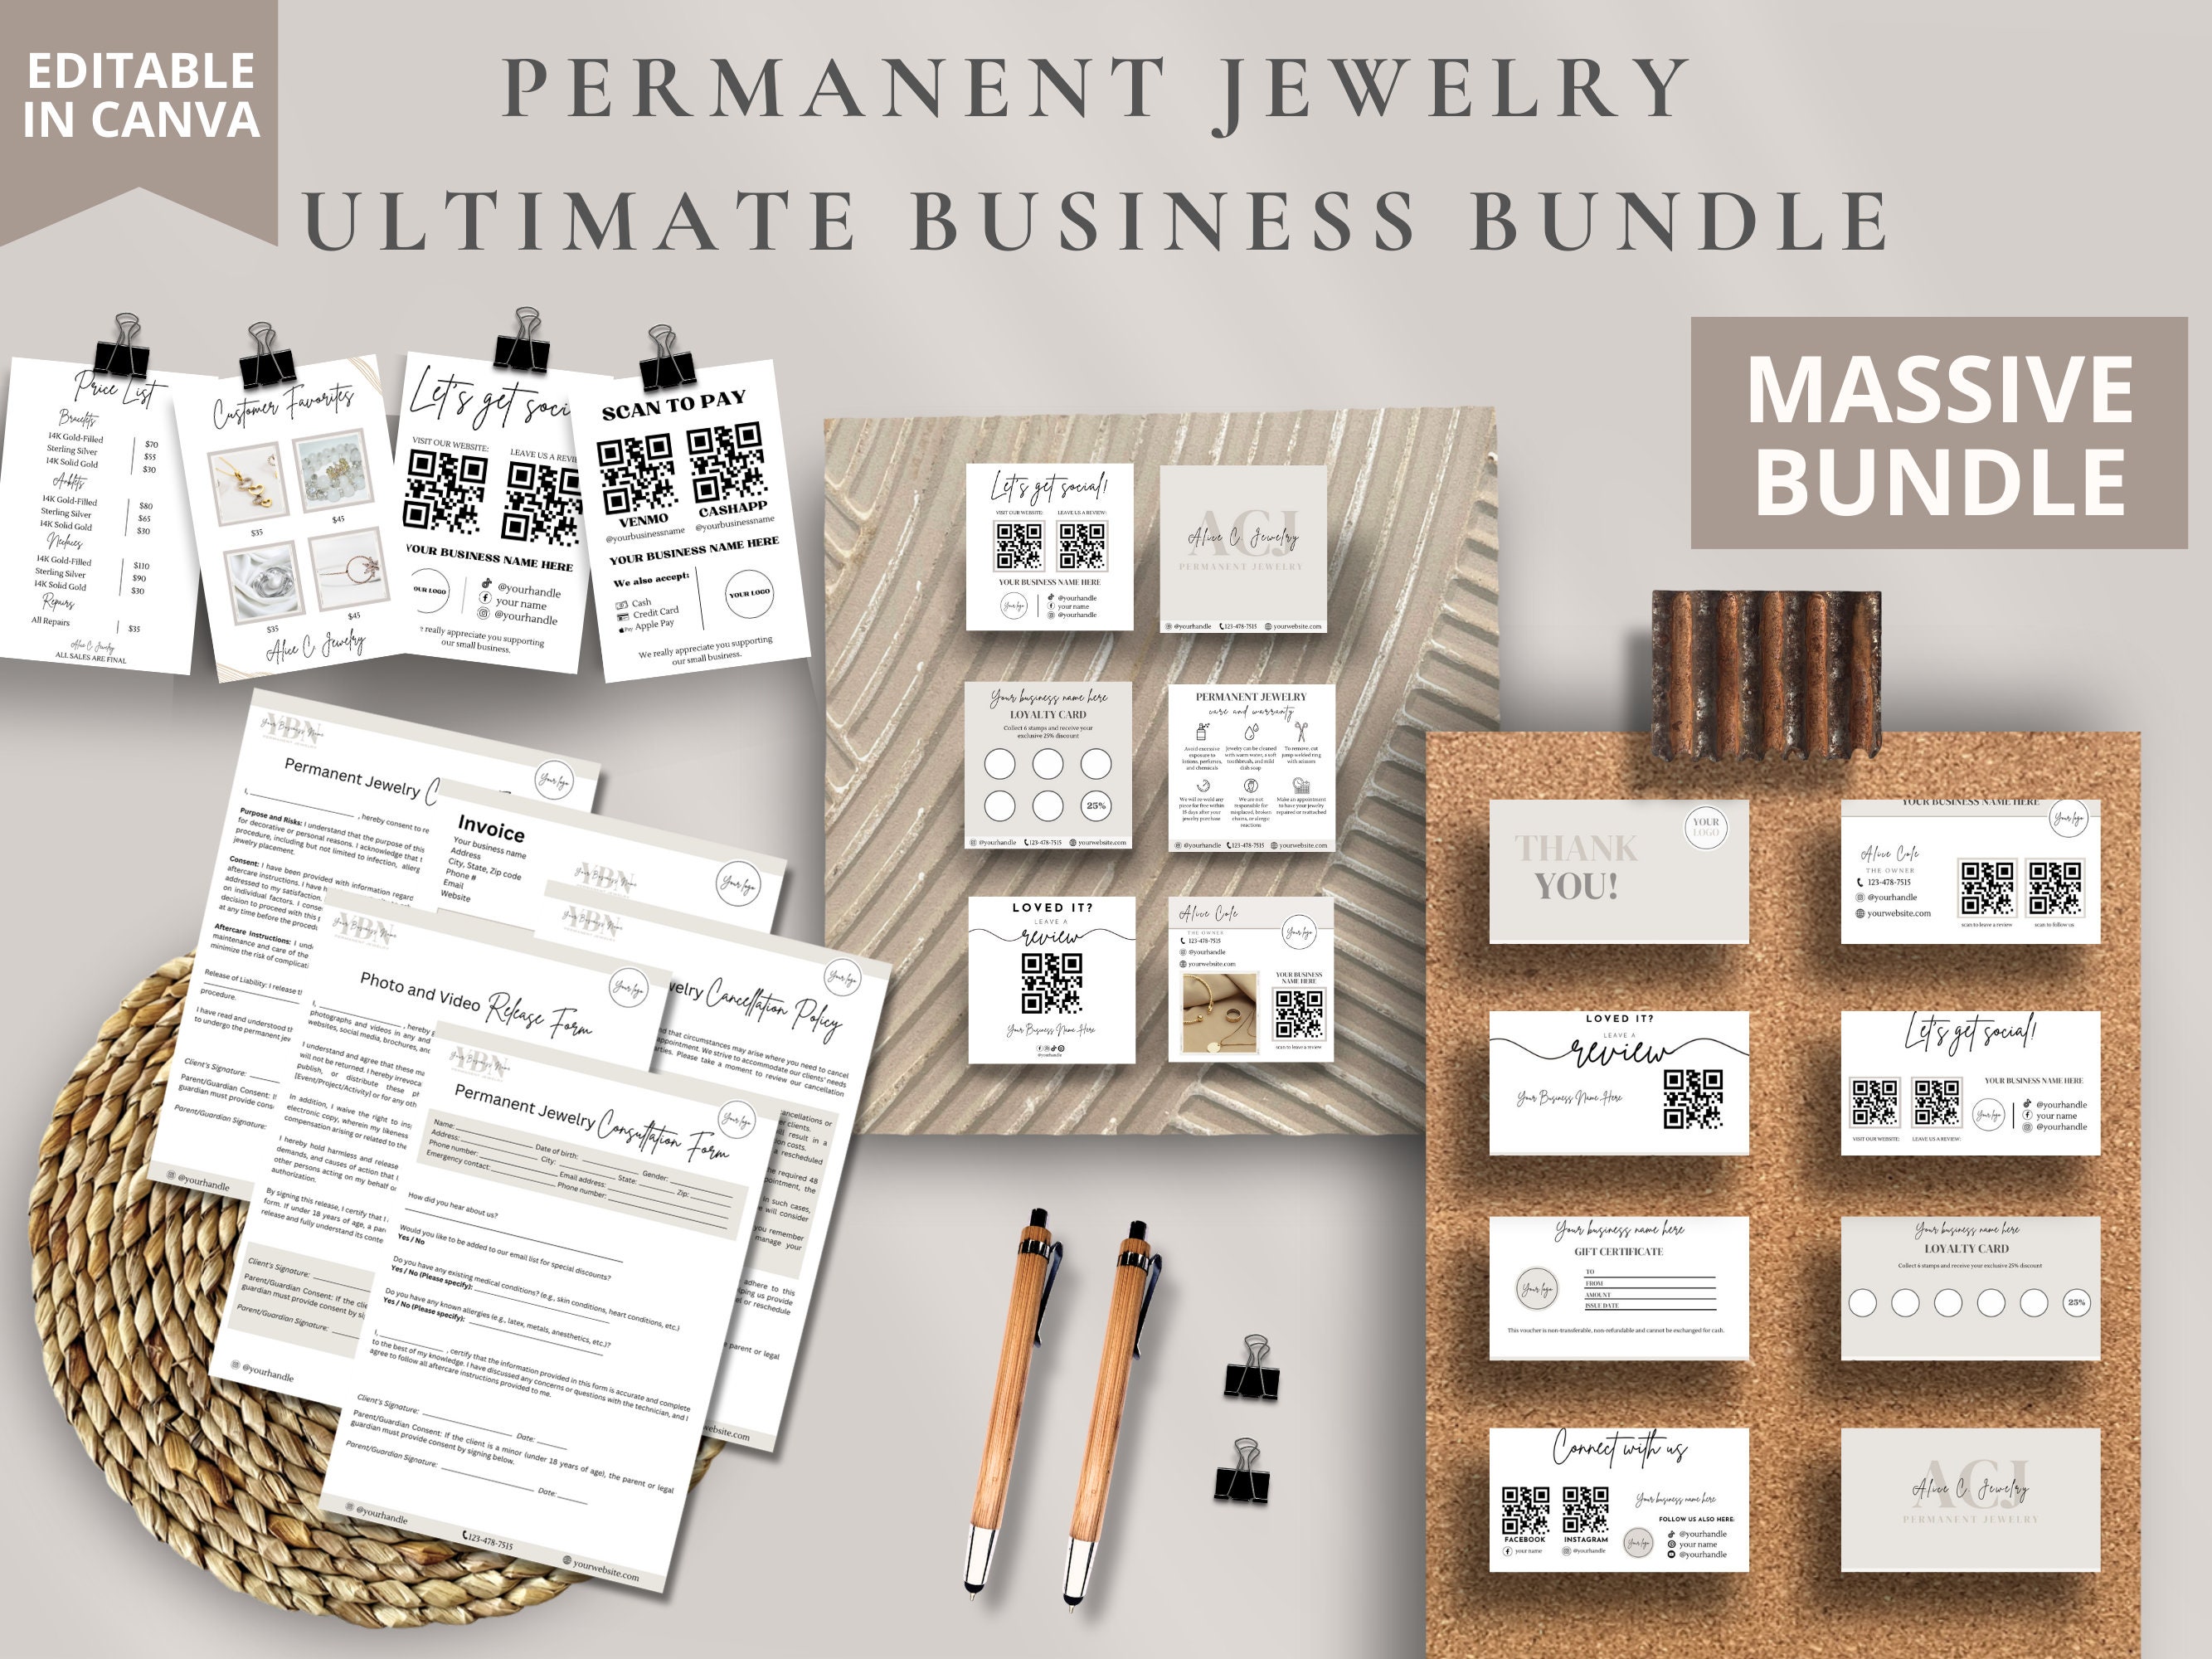 Permanent Jewelry Business Starter Pack Permanent Jewelry Kit All Supplies  Required to Start Permanent Jewelry Business No Guess Work 